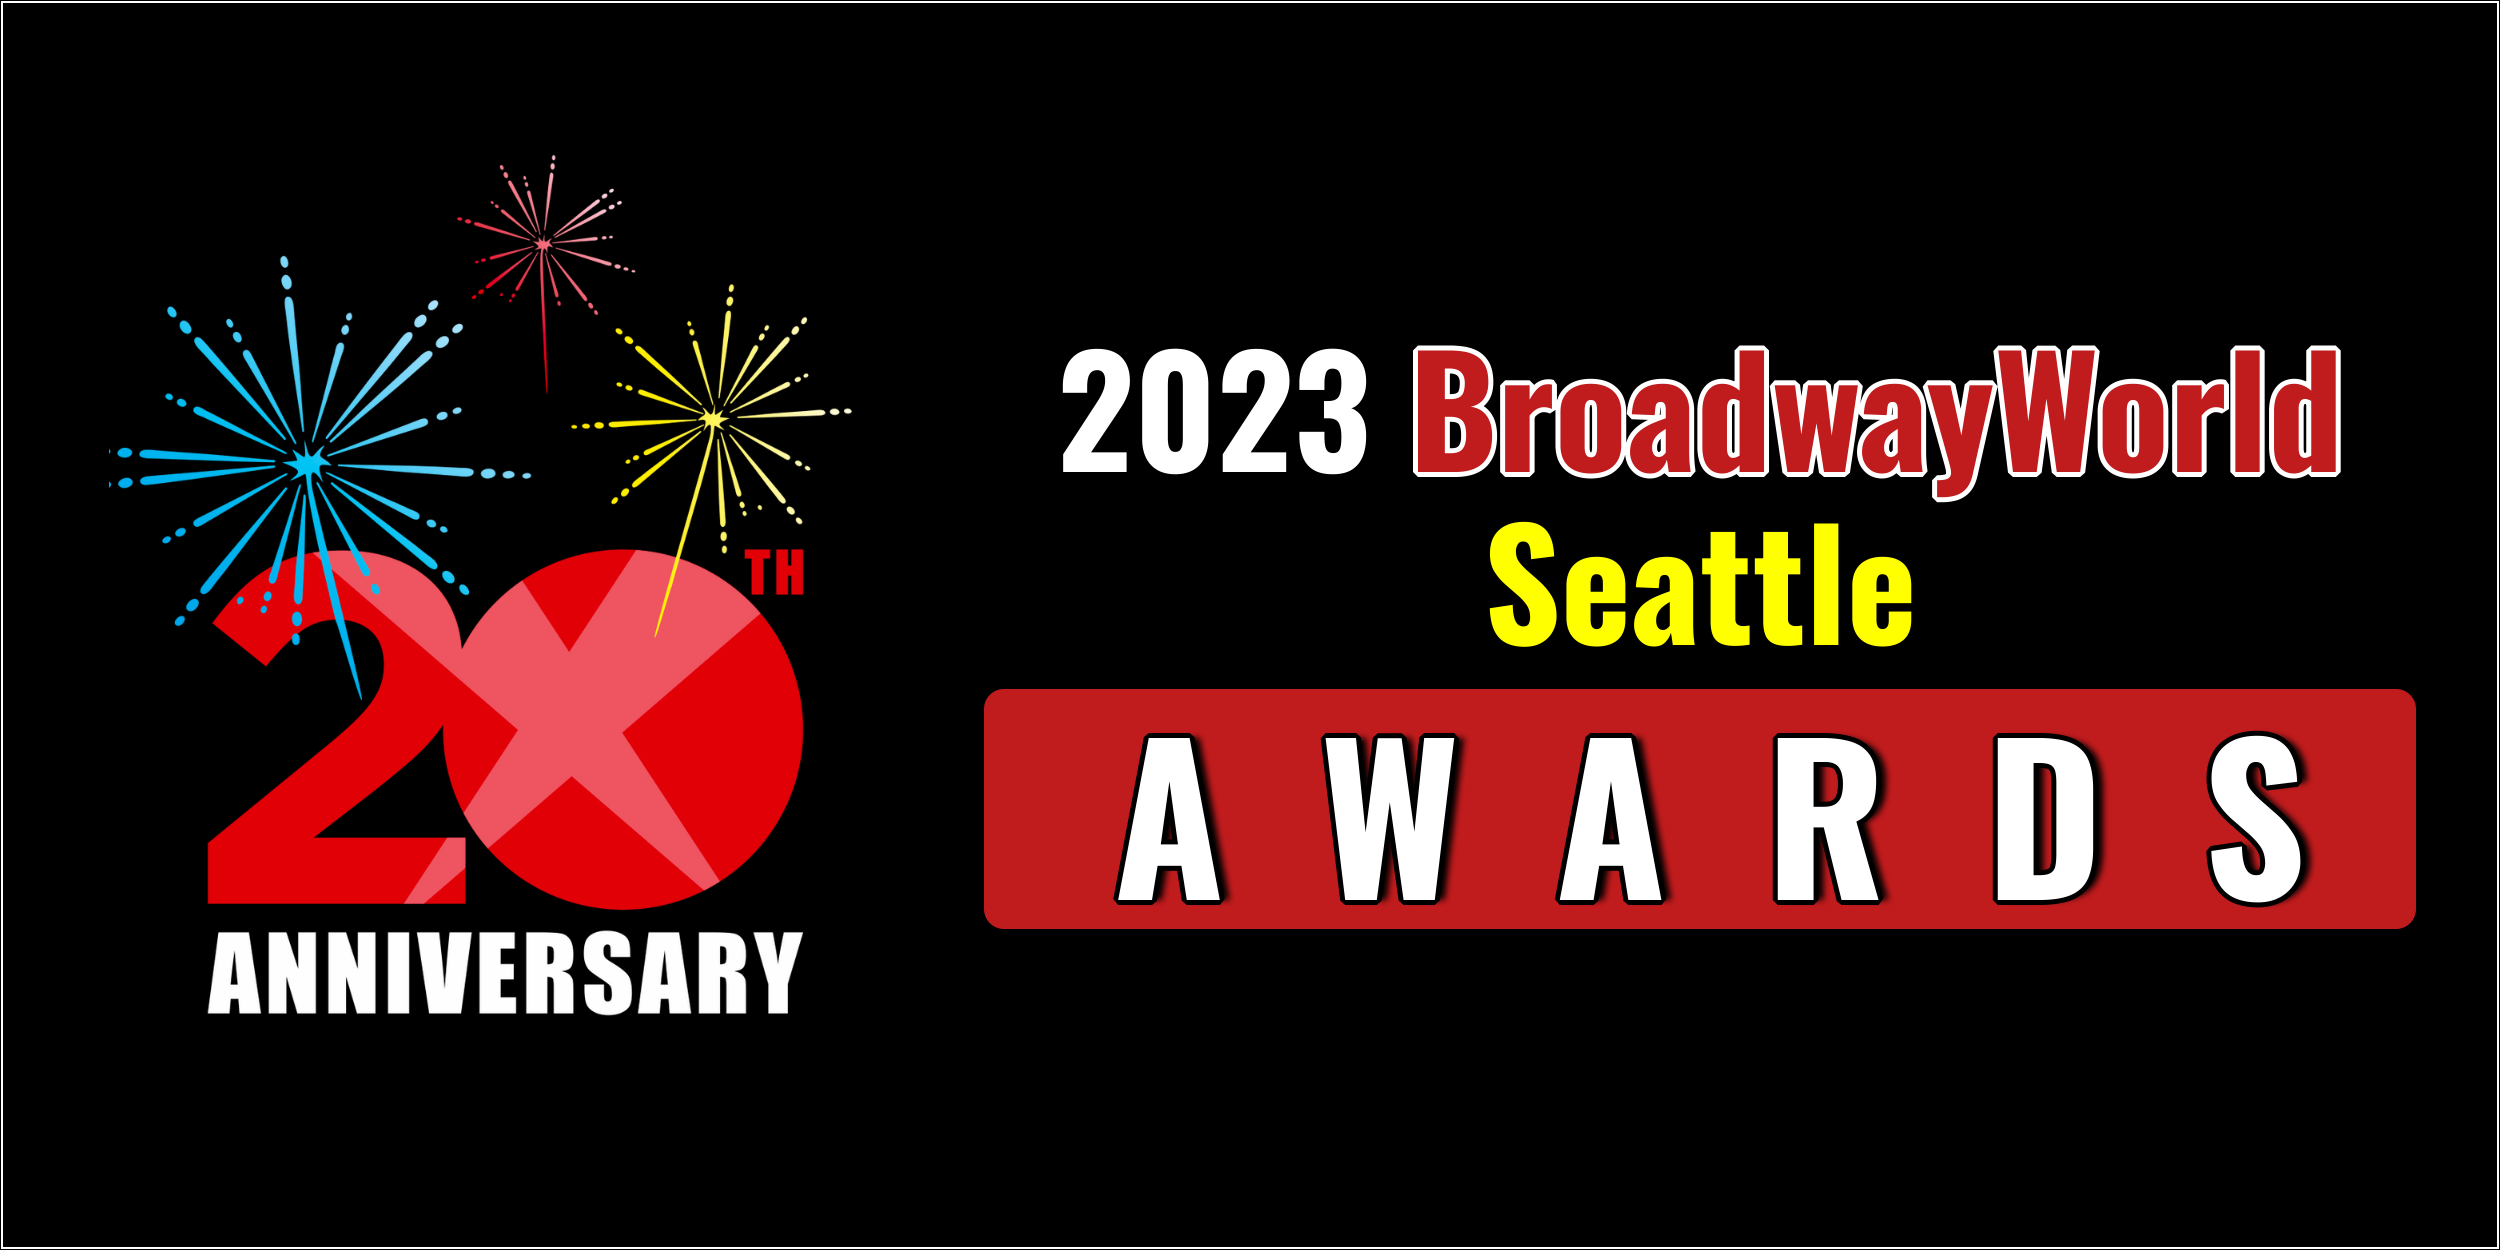 Latest Standings Announced For The 2023 BroadwayWorld Seattle Awards; HELLO, DOLLY! Leads  Photo